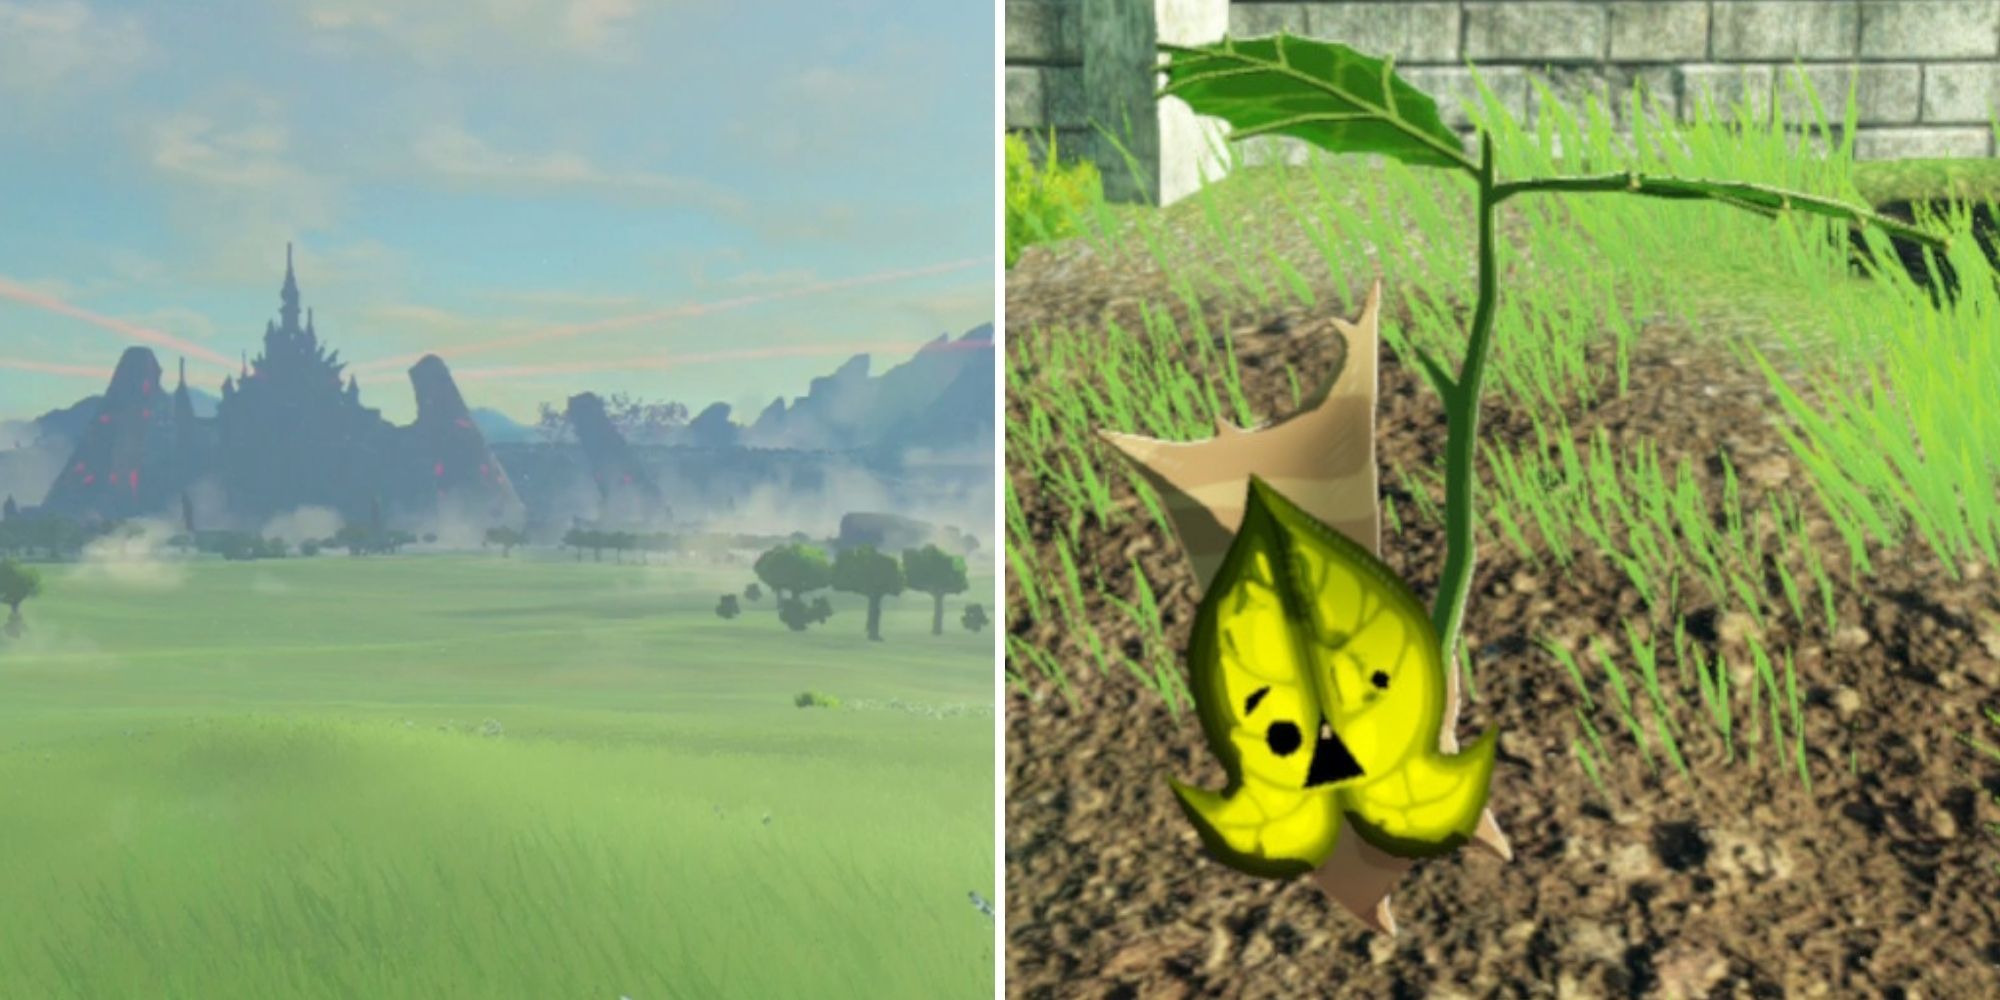 Hyrule Warriors Age of Calamity - Hyrule Castle and Hyrule Field on Right, Korok on right